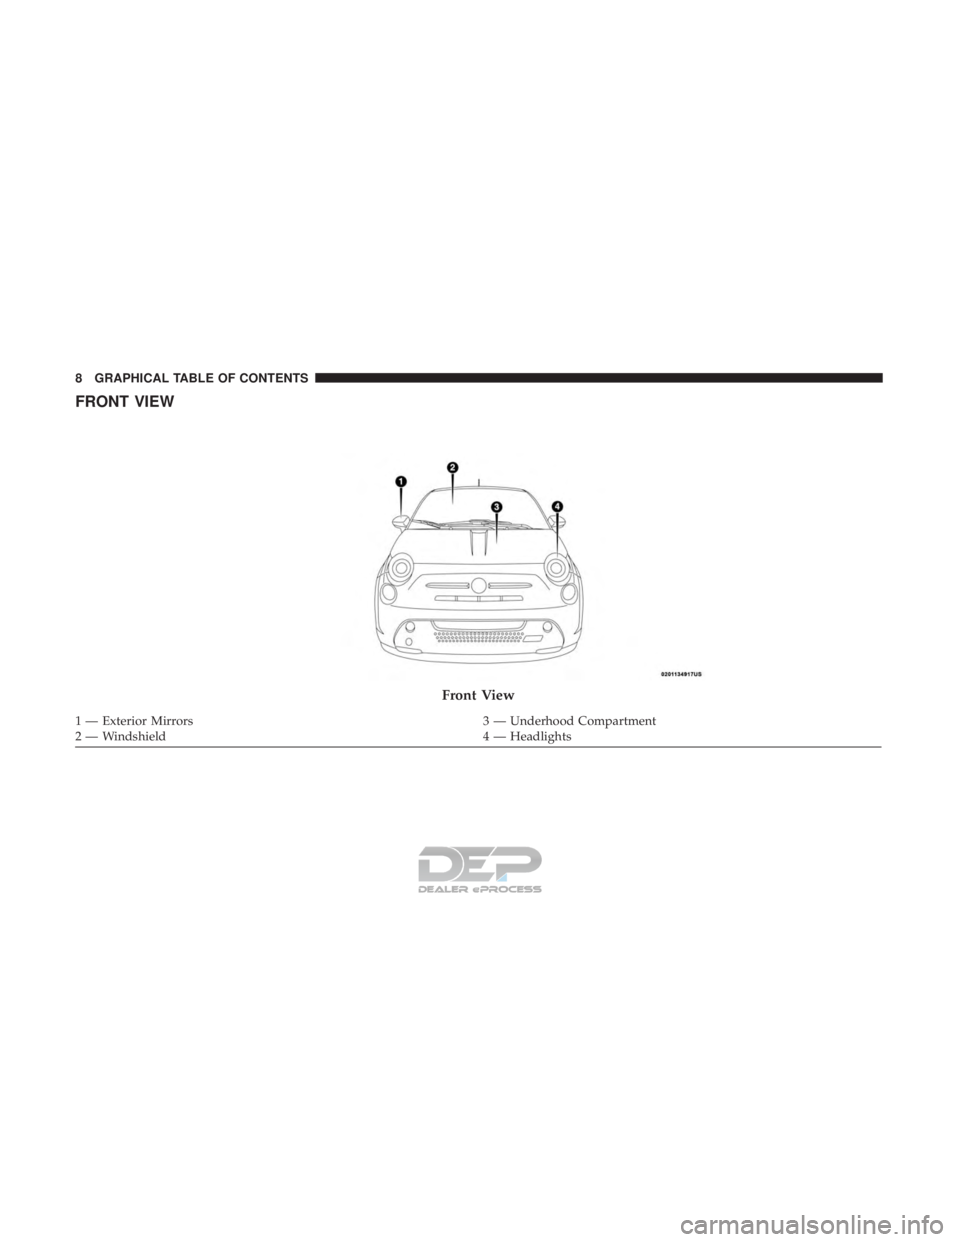 FIAT 500E 2018  Owners Manual FRONT VIEW
Front View
1 — Exterior Mirrors3 — Underhood Compartment
2 — Windshield 4 — Headlights
8 GRAPHICAL TABLE OF CONTENTS  